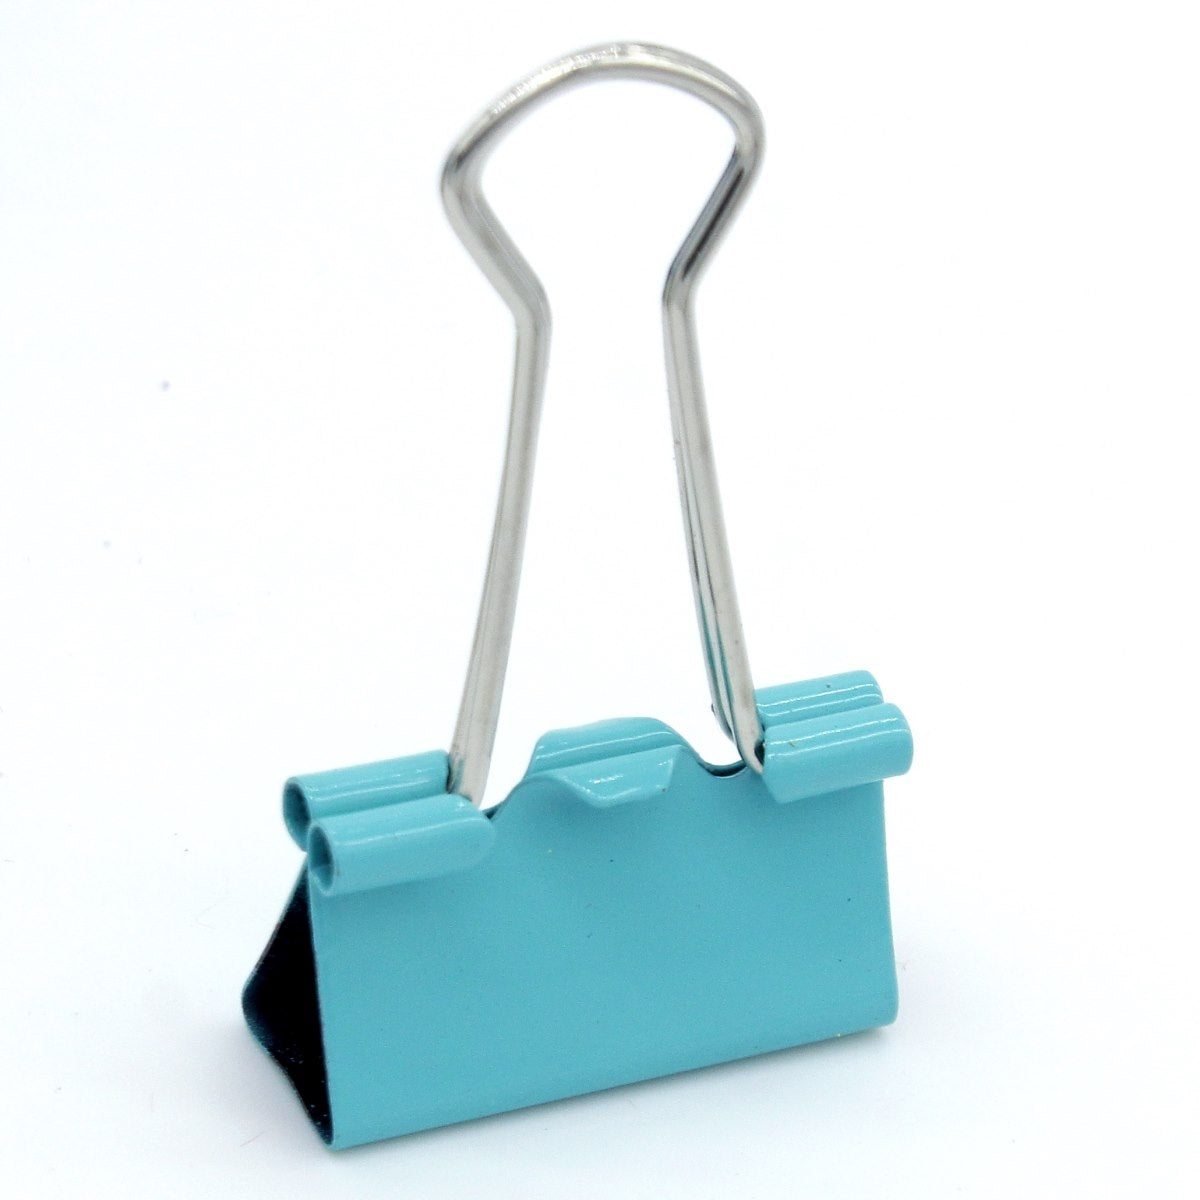 Set of 48 Pcs Binder Clips Assorted Colors 25mm - For Shops, Schools, Corporates, Office Use